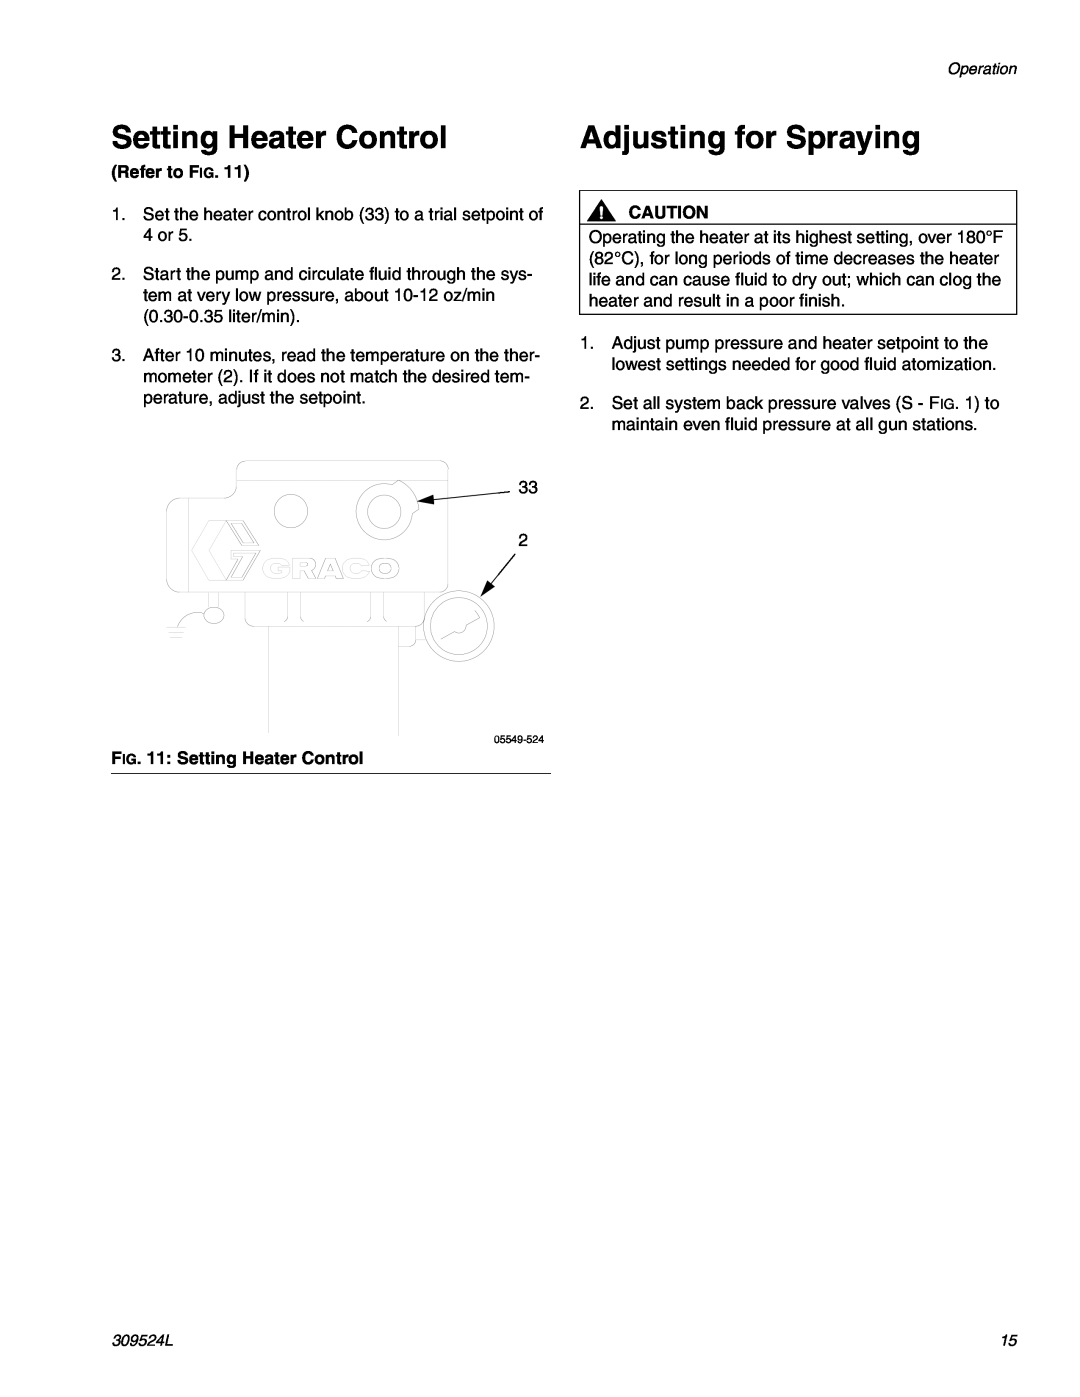 Graco 309524L important safety instructions Setting Heater Control, Adjusting for Spraying, Refer to FIG 